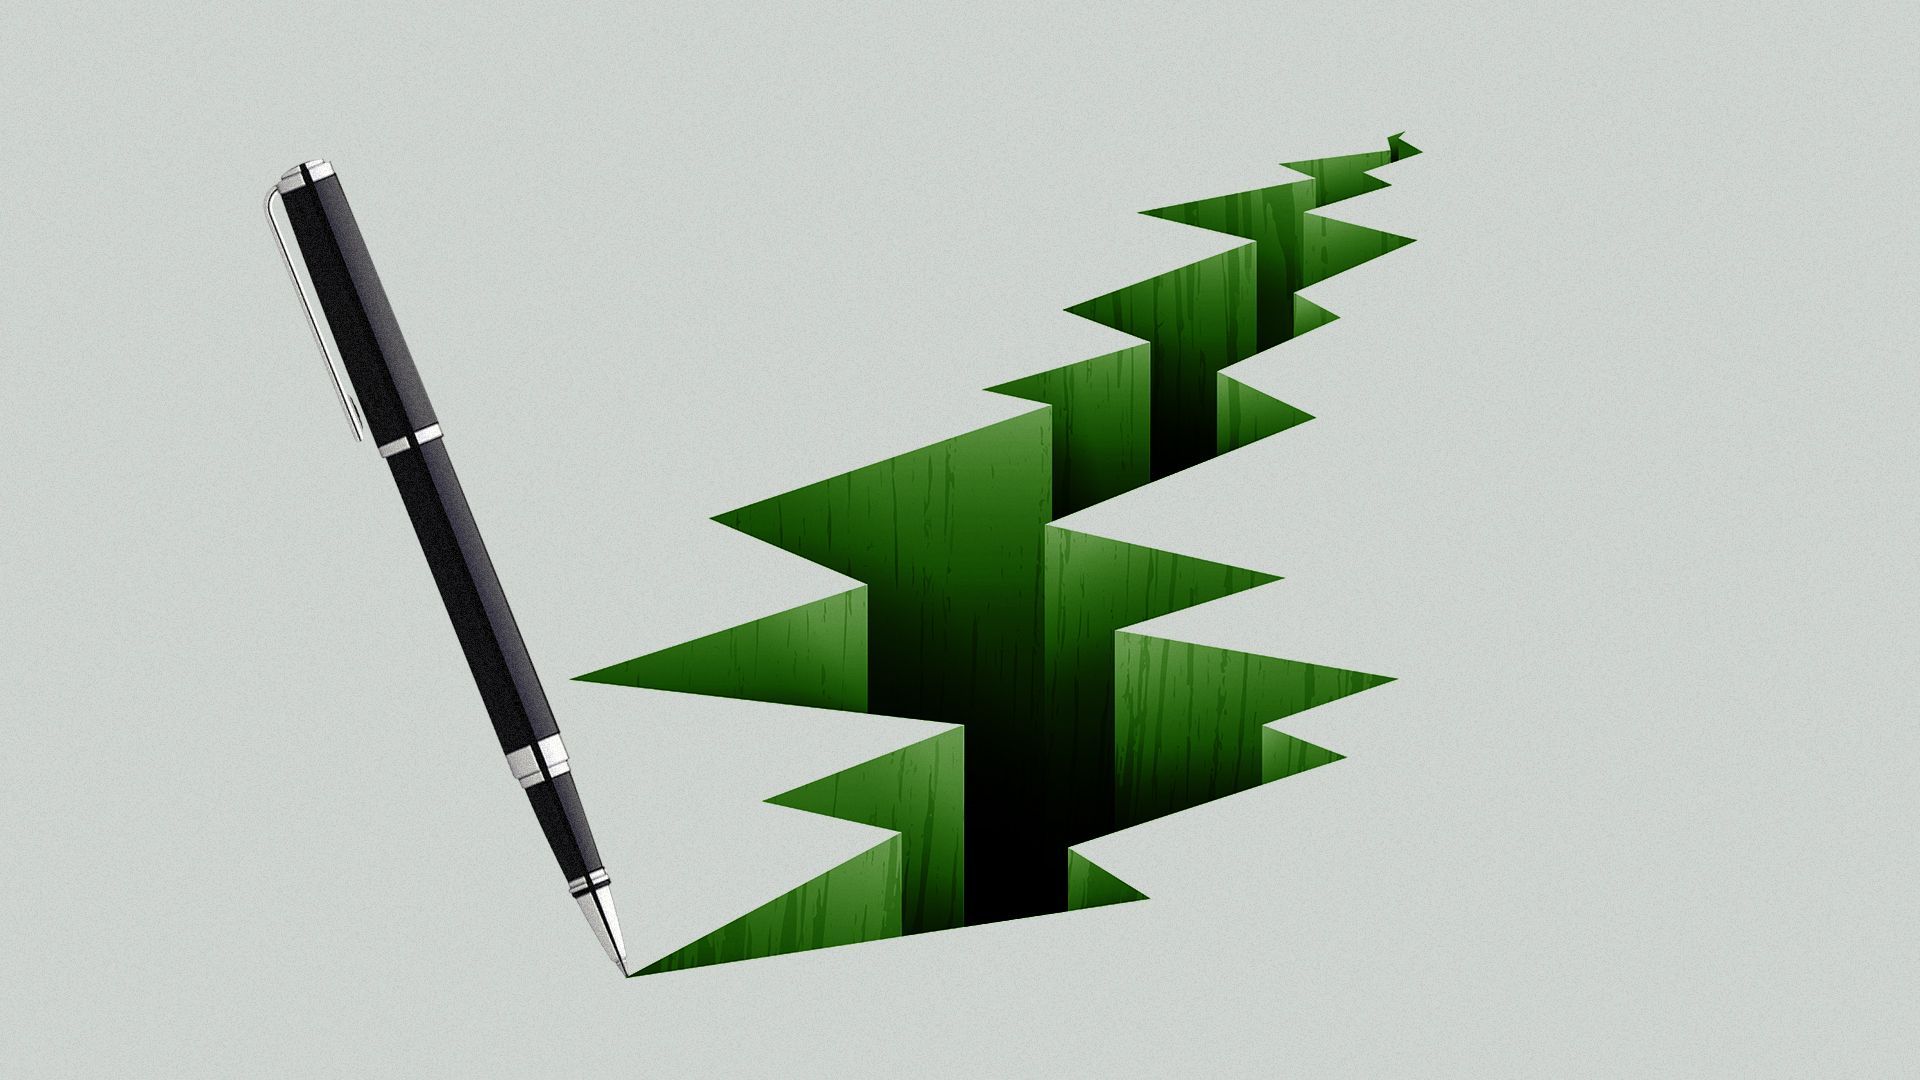 Illustration of the tip of a pen touching a jagged fault line